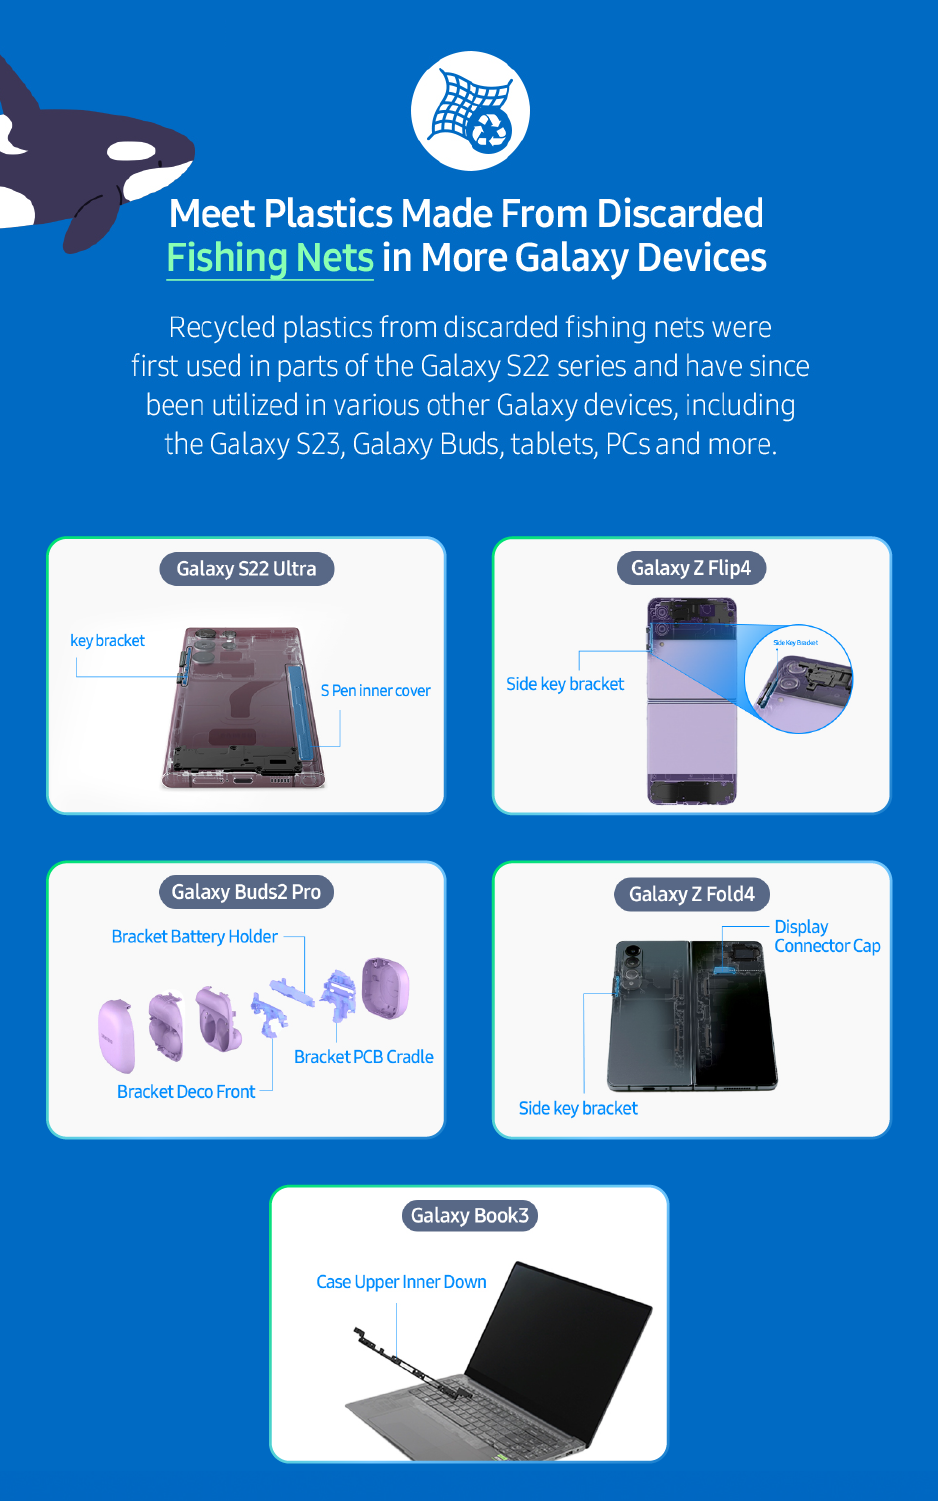 samsung-plastics-discarded-fishing-nets-galaxy-devices-world-water-day-2023